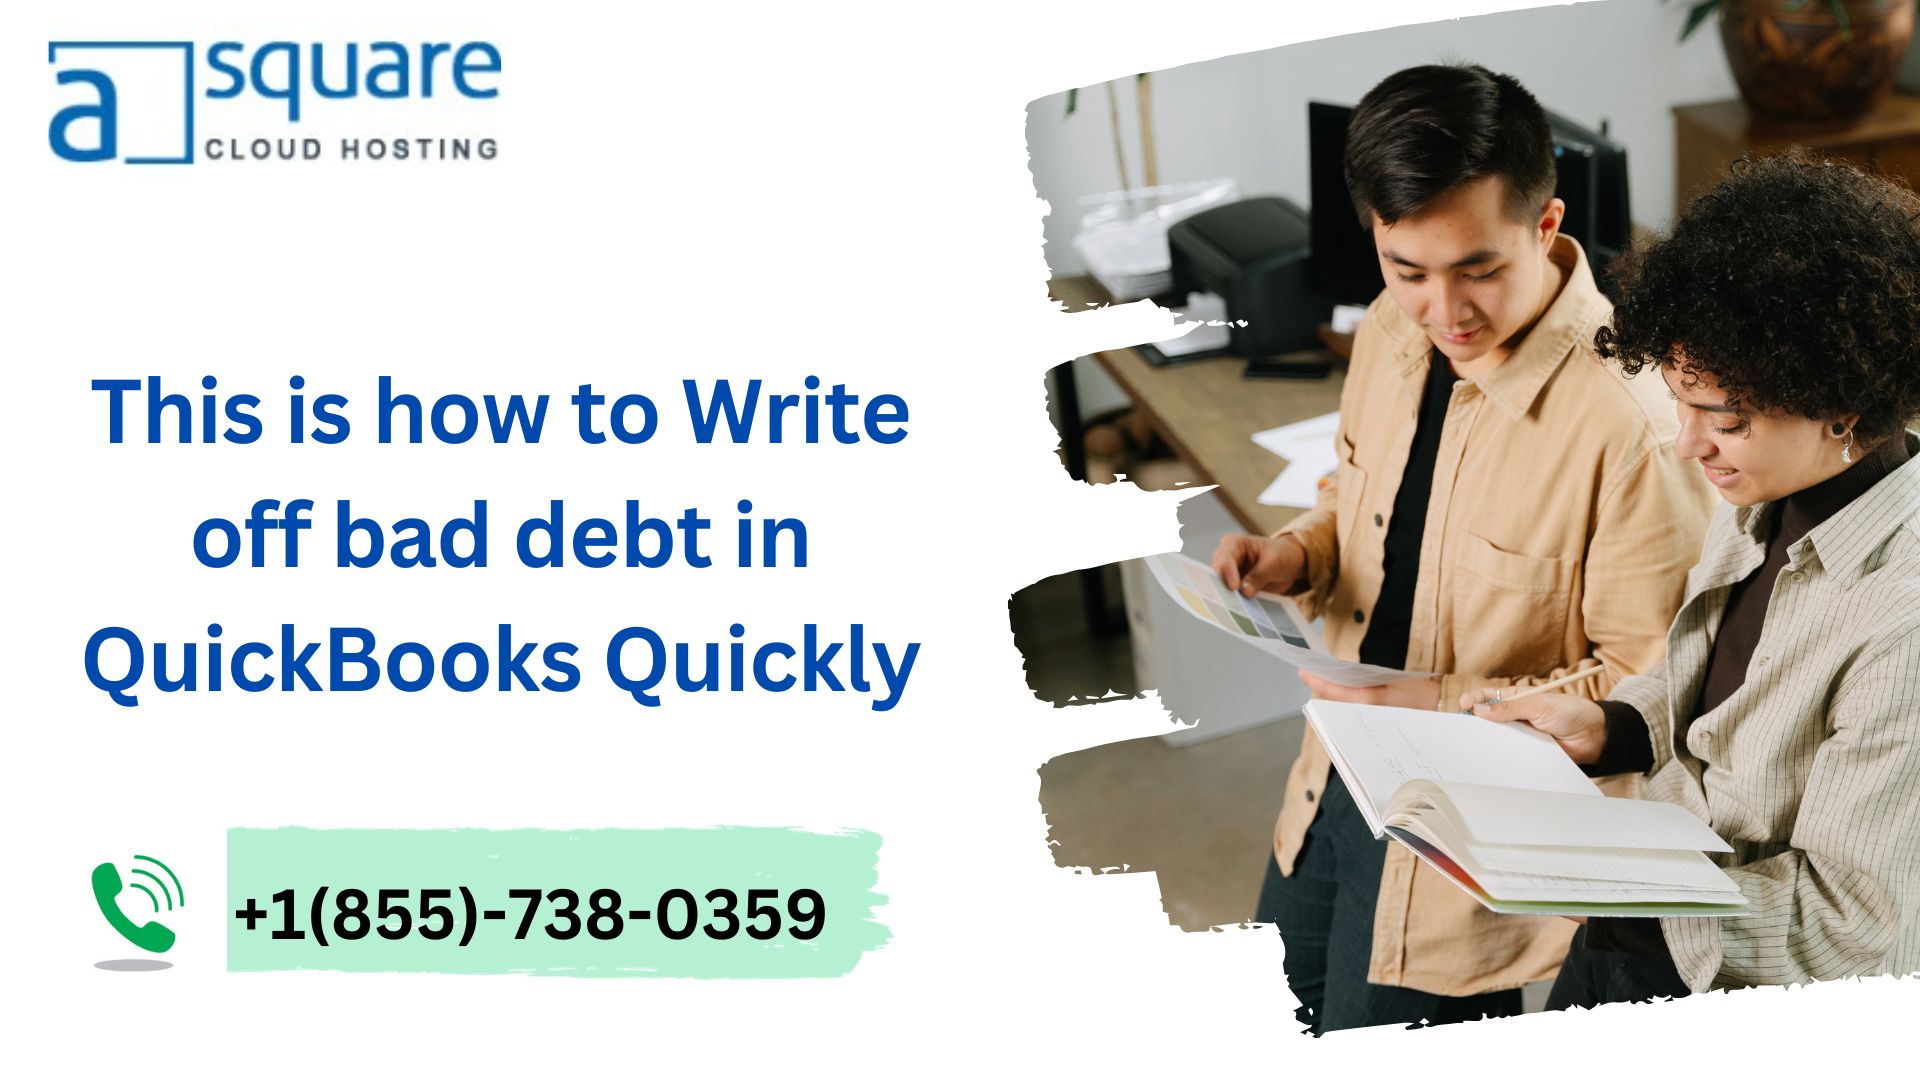 This is how to Write off bad debt in QuickBooks quickly - Livechatexpert.com.au